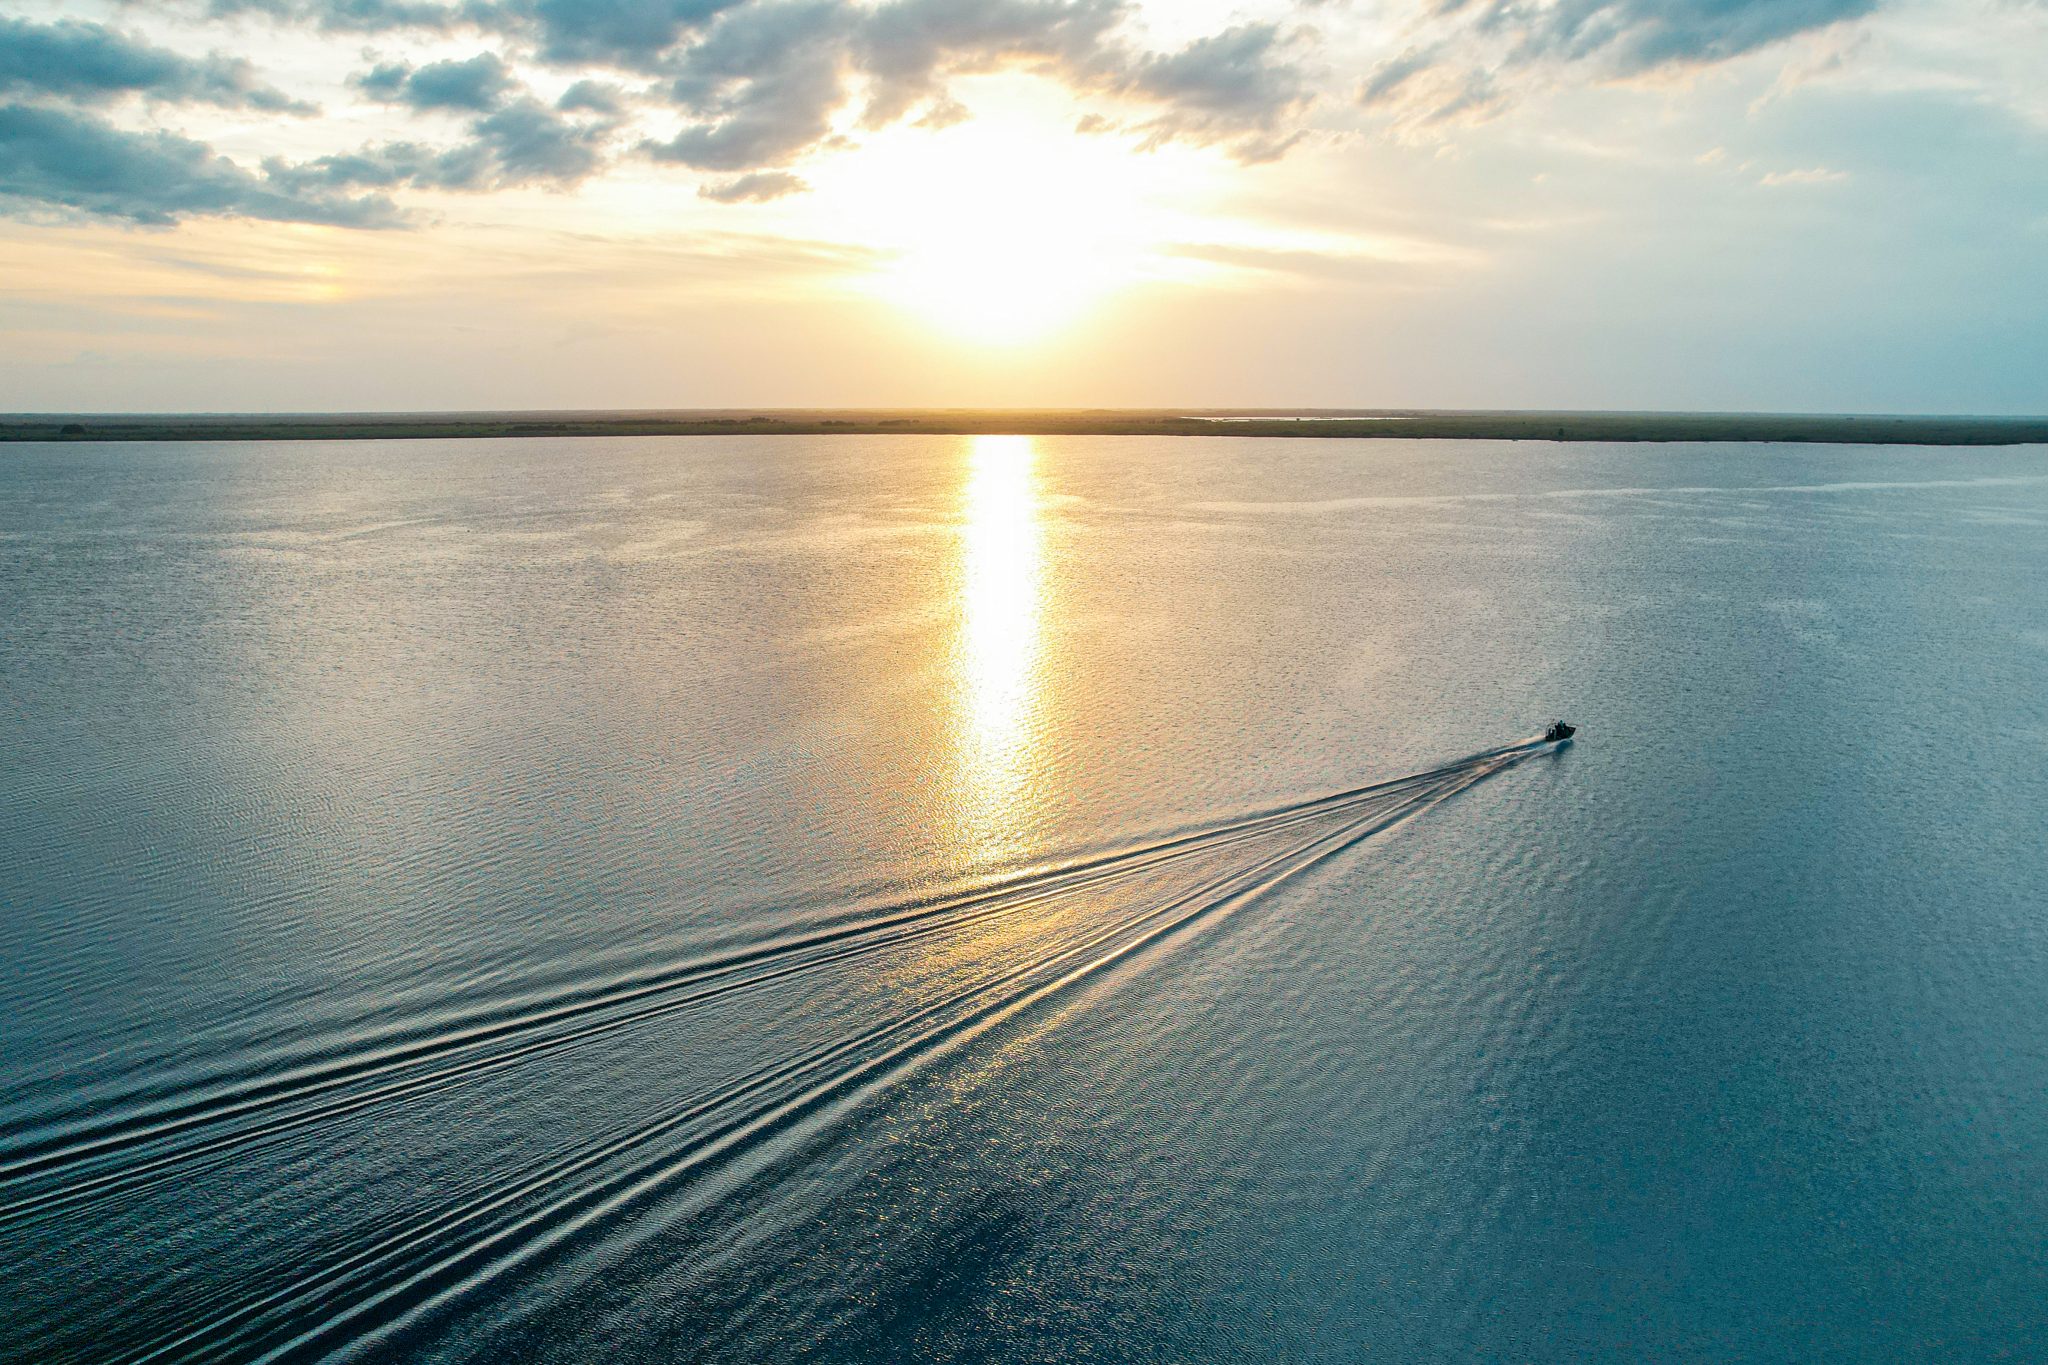 Airboat on a lake at sunset